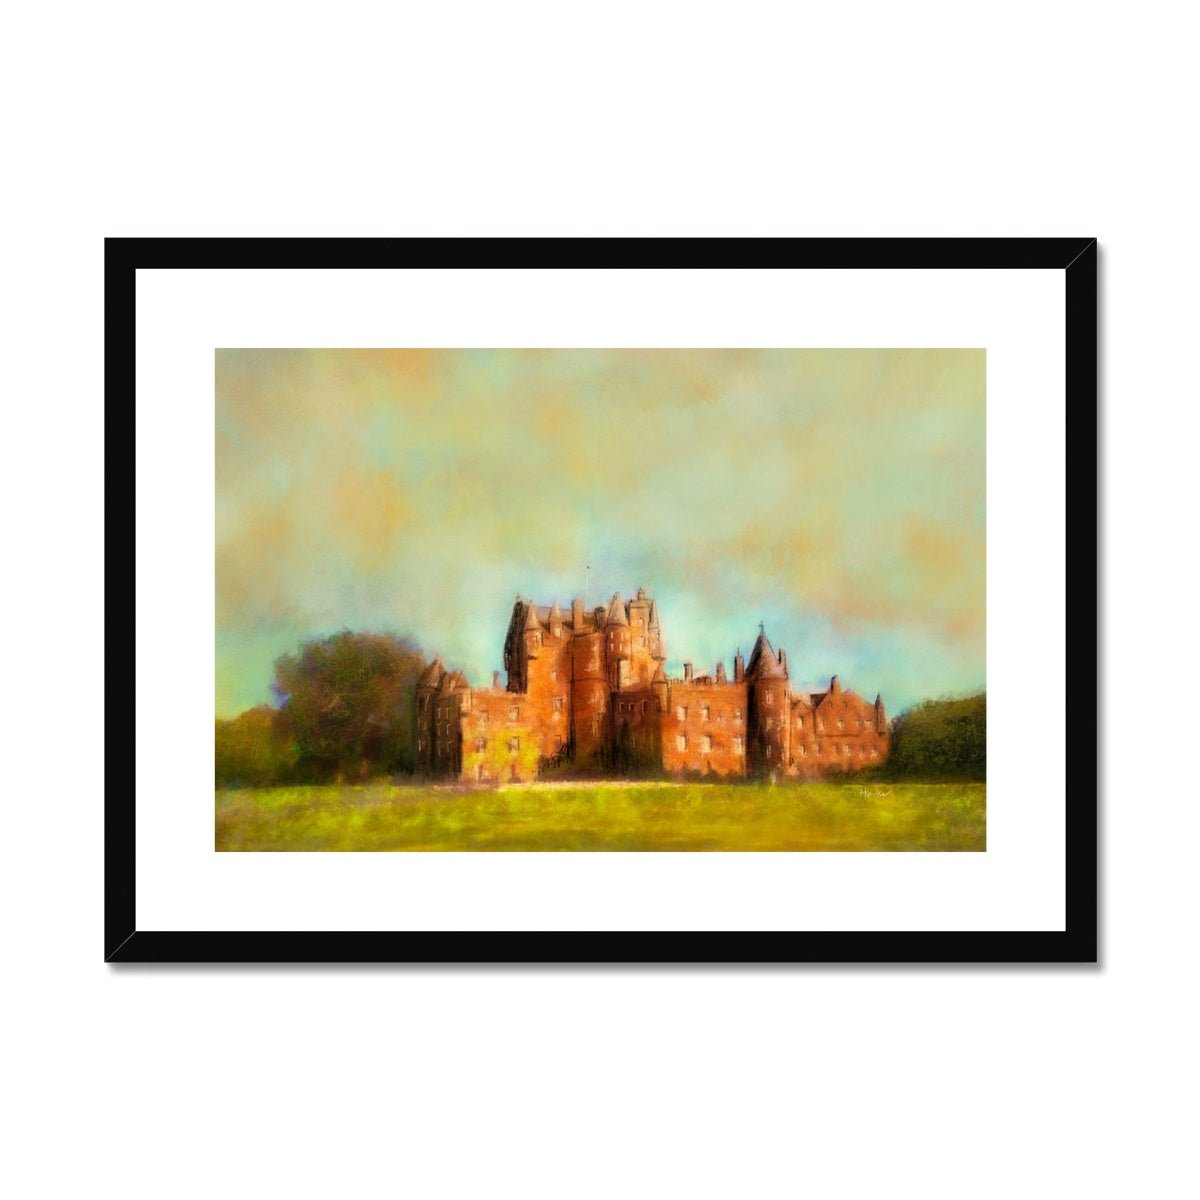 Glamis Castle Painting | Framed & Mounted Prints From Scotland-Framed & Mounted Prints-Scottish Castles Art Gallery-A2 Landscape-Black Frame-Paintings, Prints, Homeware, Art Gifts From Scotland By Scottish Artist Kevin Hunter